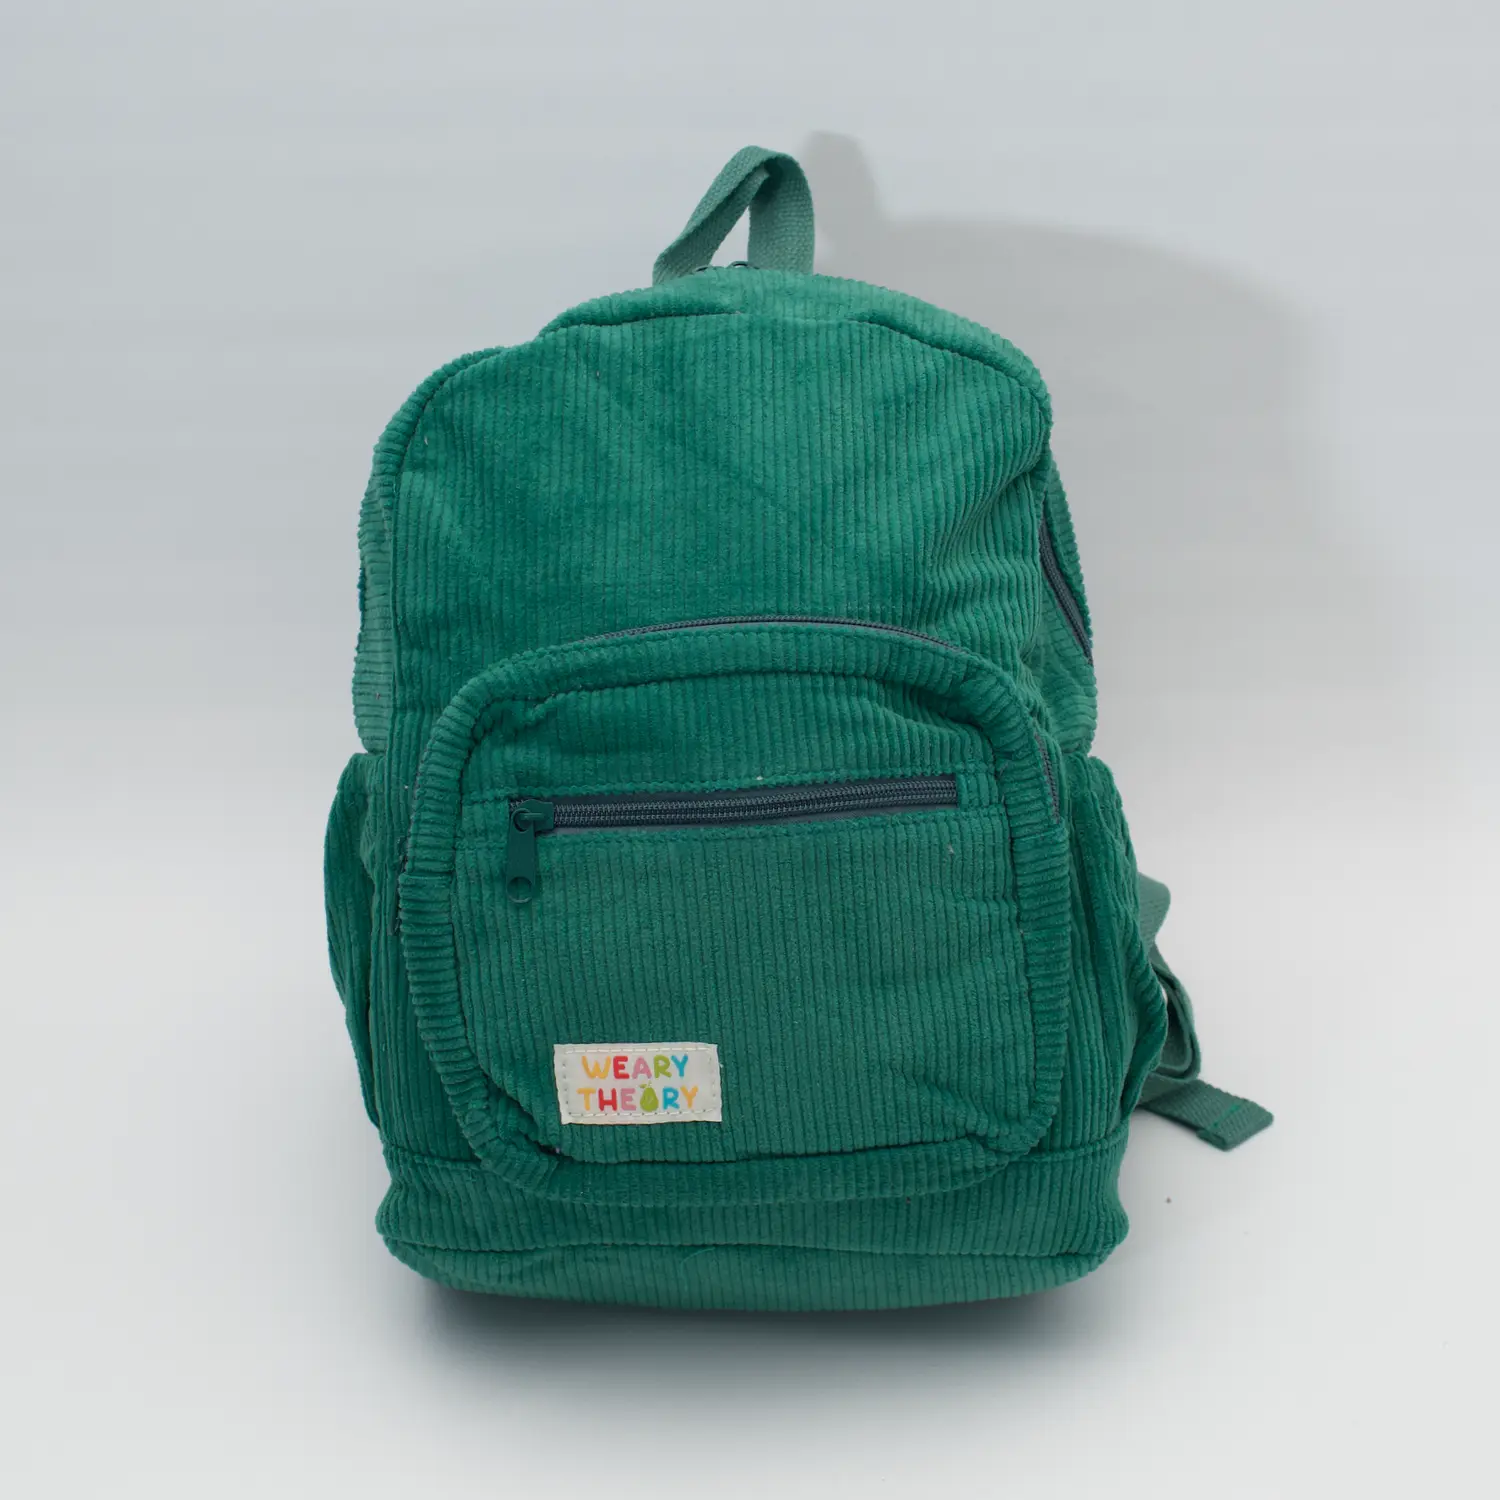 Personalised Backpacks | Weary Theory